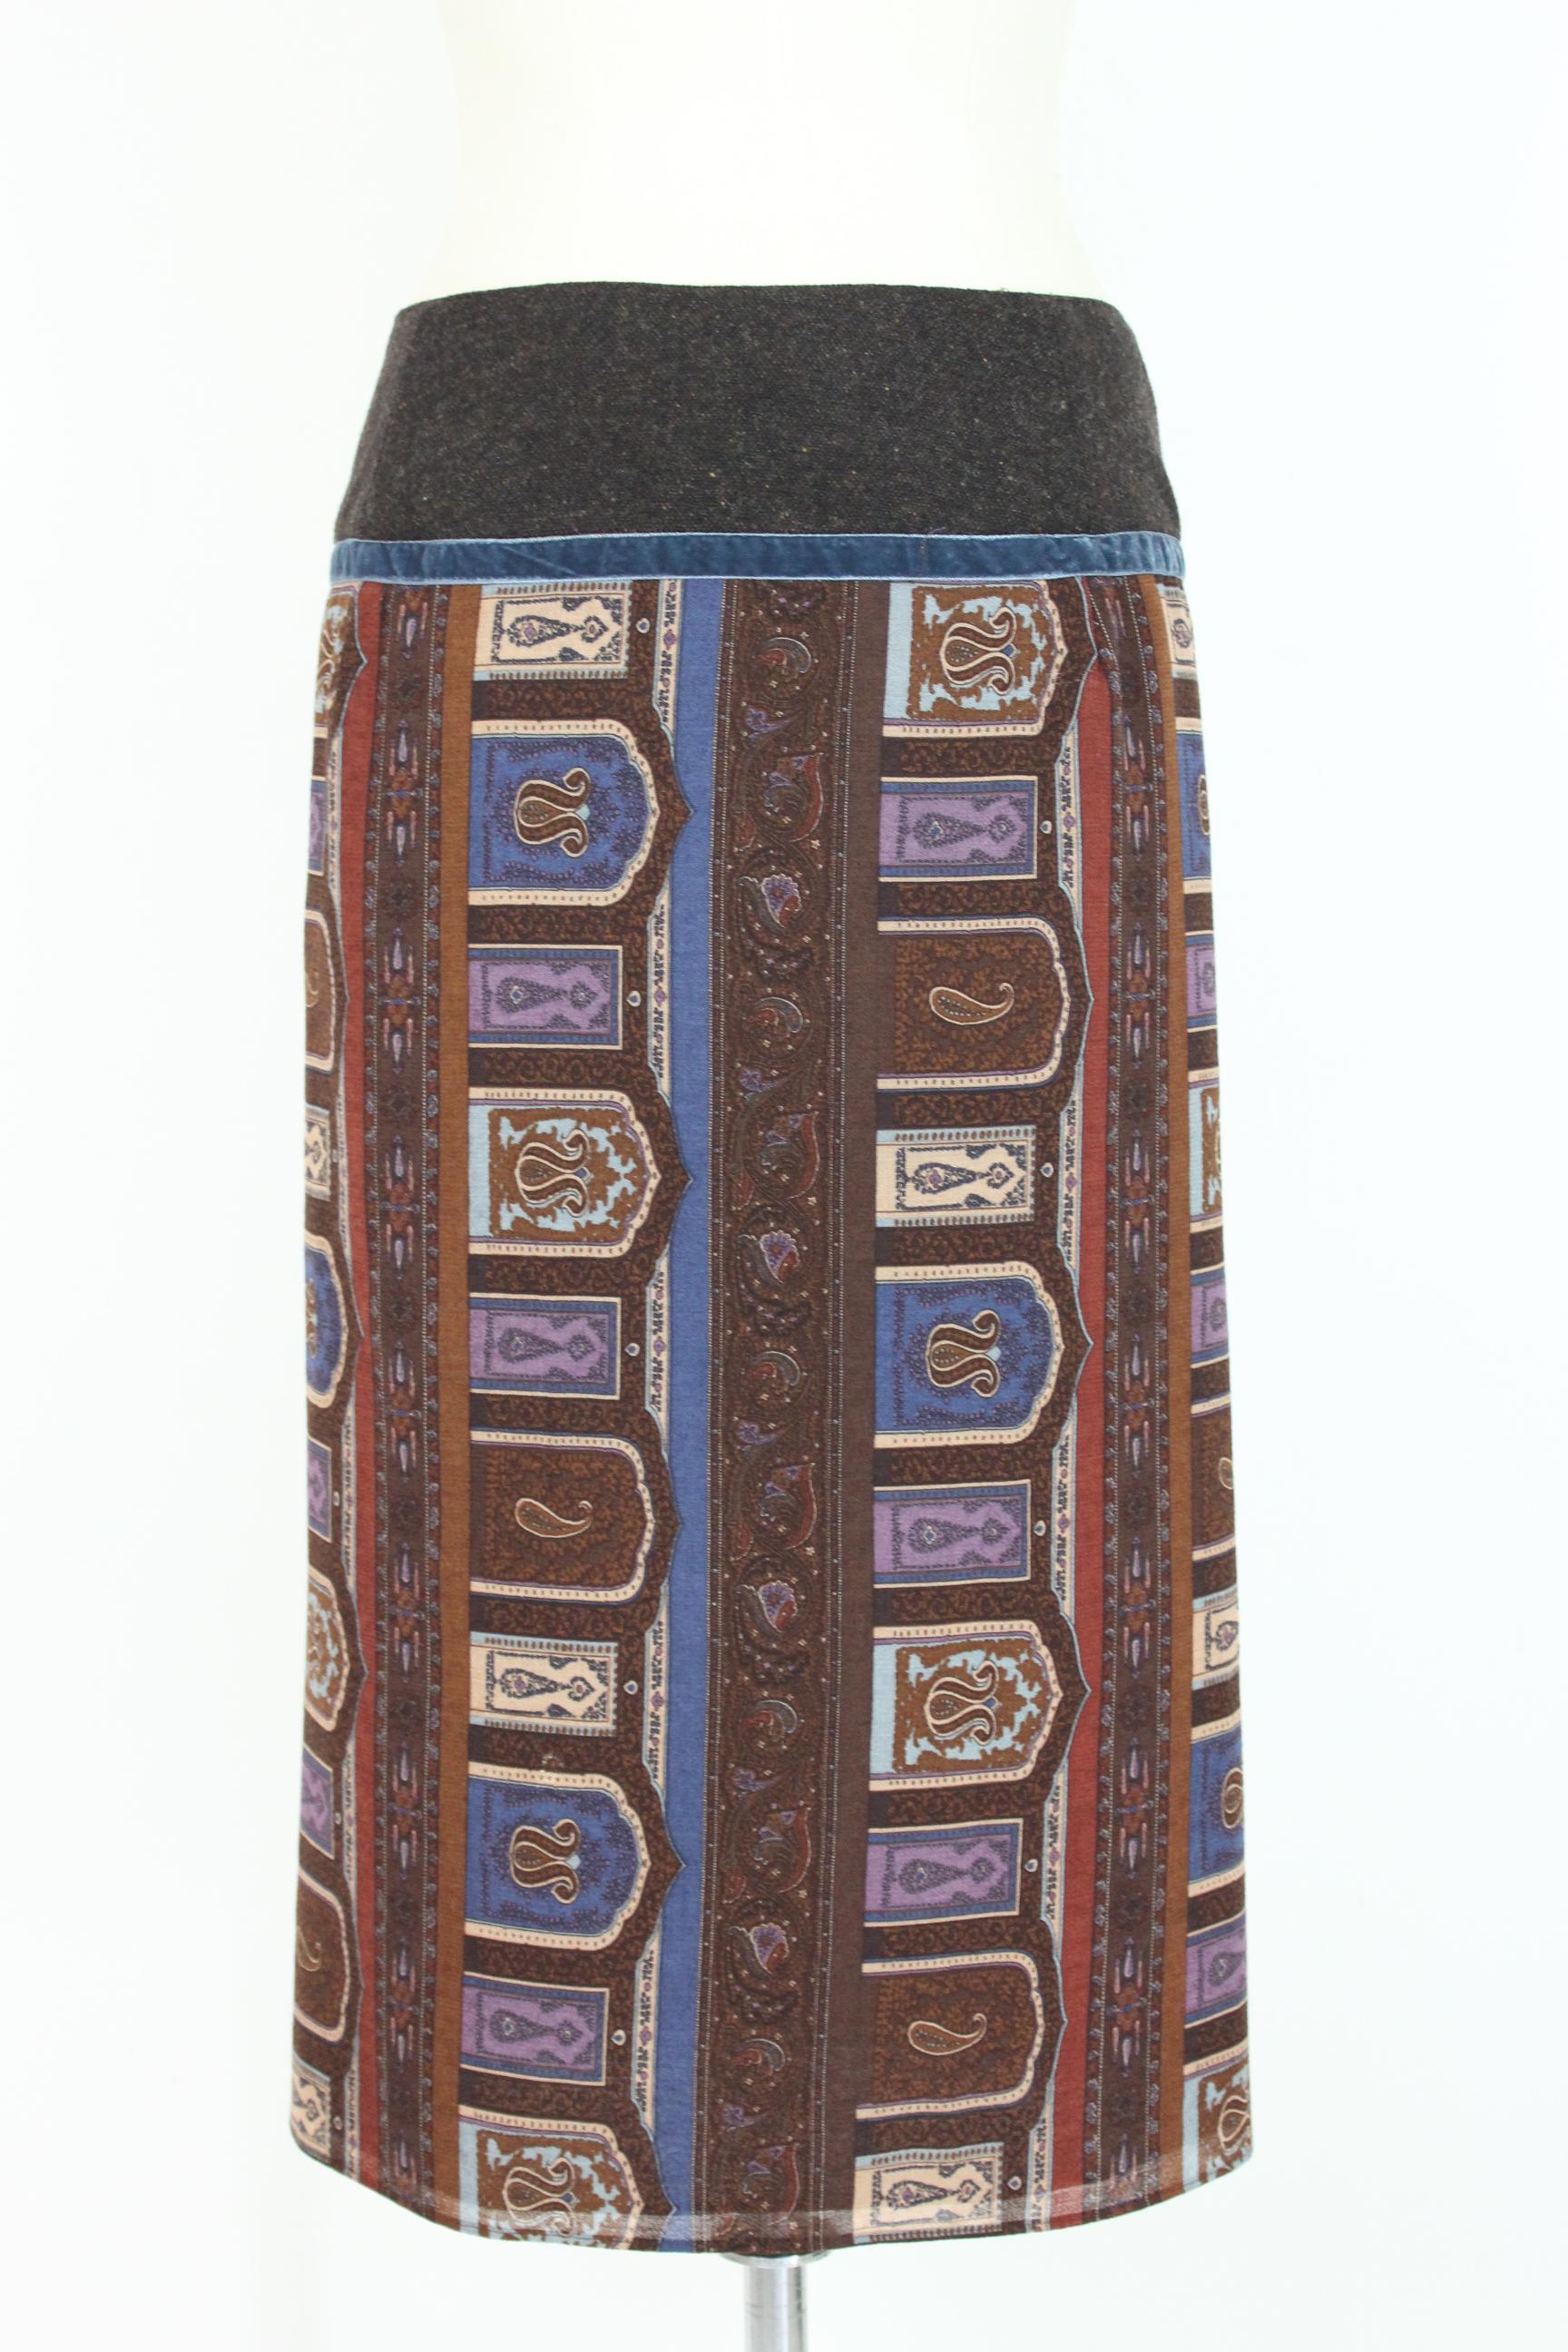 Etro vintage 90s skirt. Knee length, wallet model with side button closure. Blue and brown paisley designs. 100% wool, inner lining. Made in Italy. Excellent vintage conditions.

Size: 44 It 10 Us 12 Uk

Waist: 39 cm

Length: 69cm